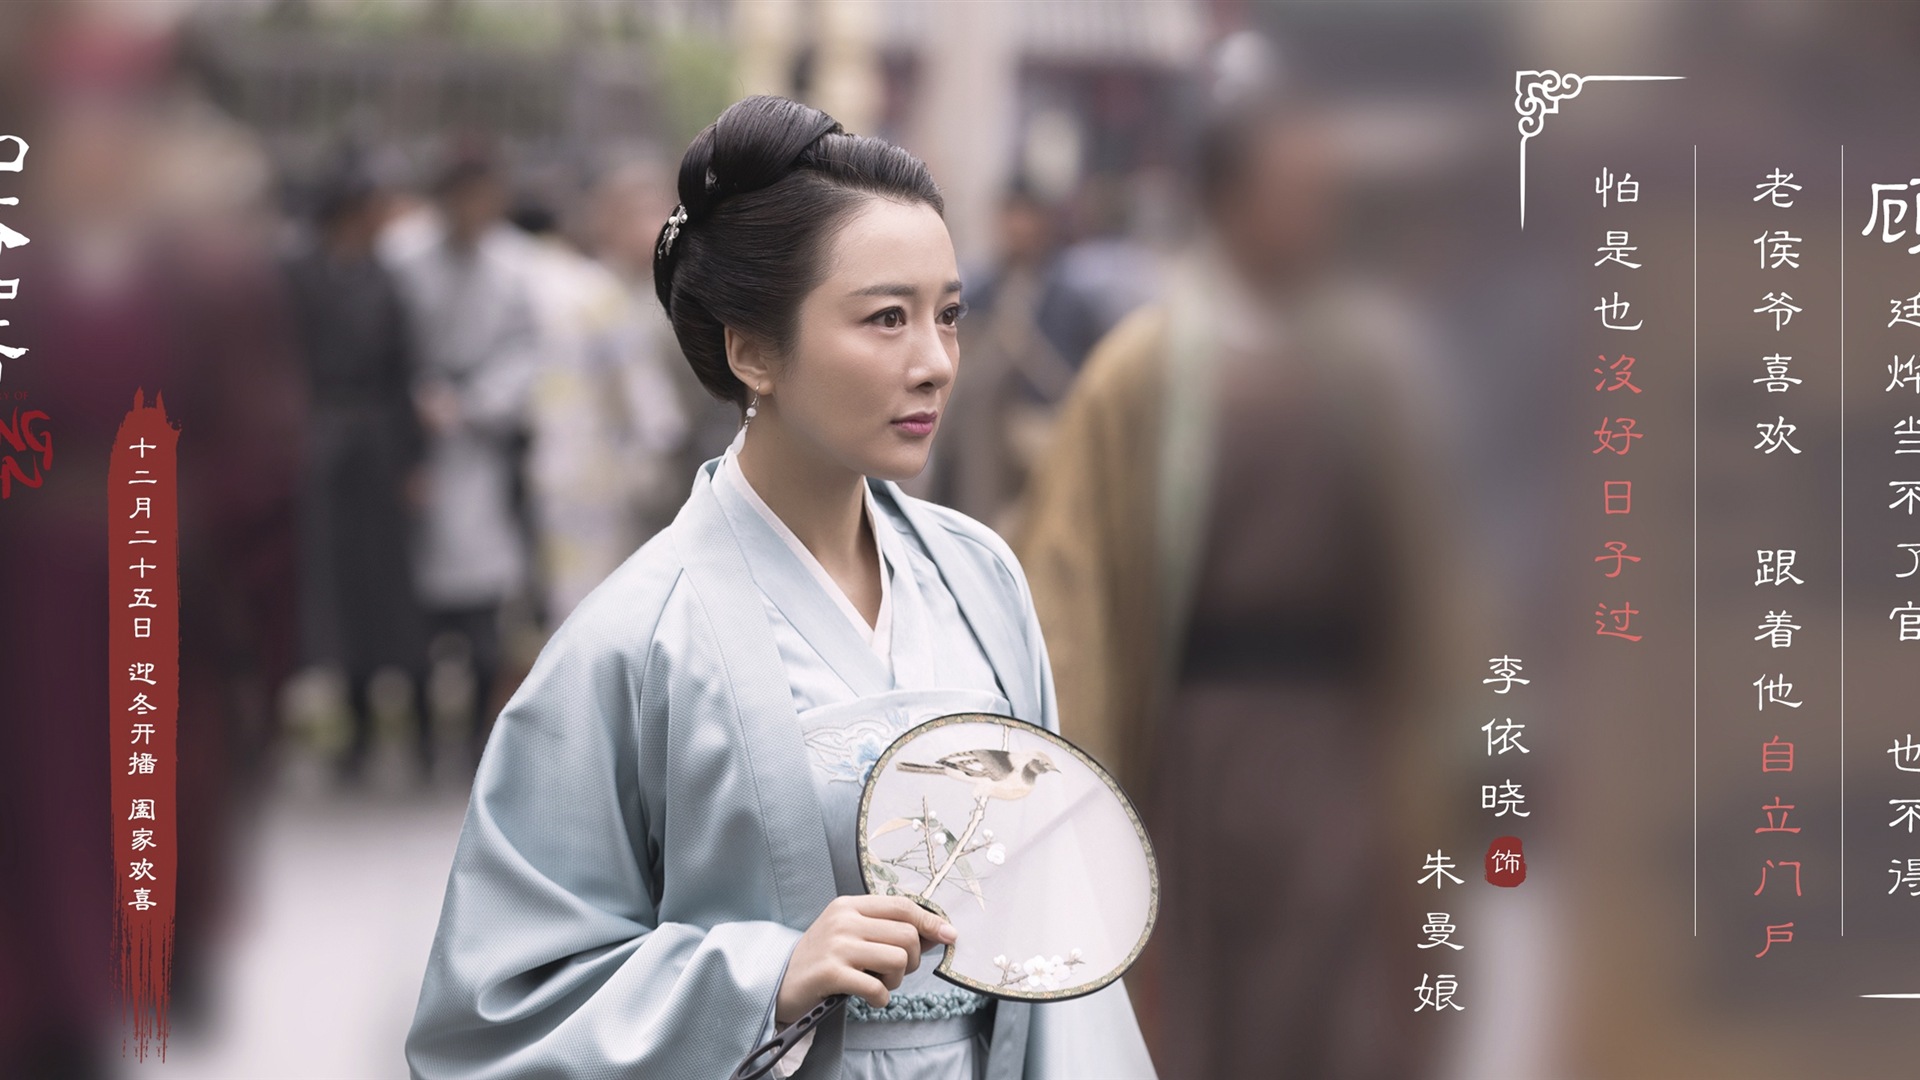 The Story Of MingLan, TV series HD wallpapers #34 - 1920x1080